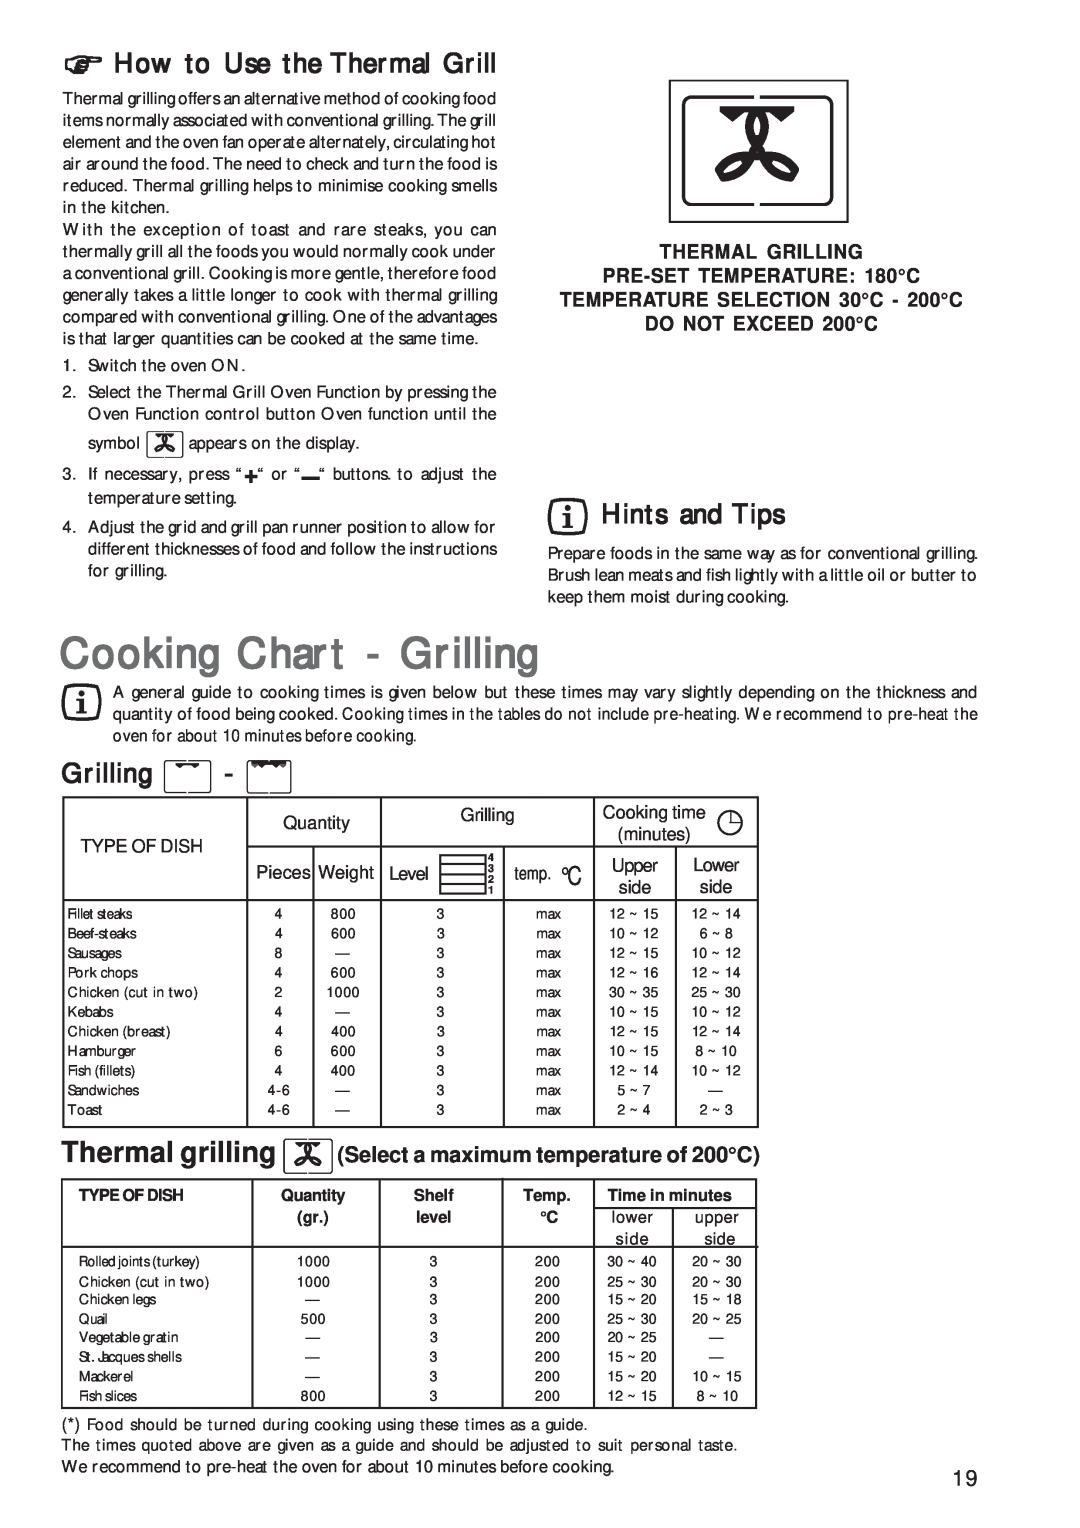 John Lewis JLBIOS602 instruction manual How to Use the Thermal Grill, Cooking Chart - Grilling, Hints and Tips 